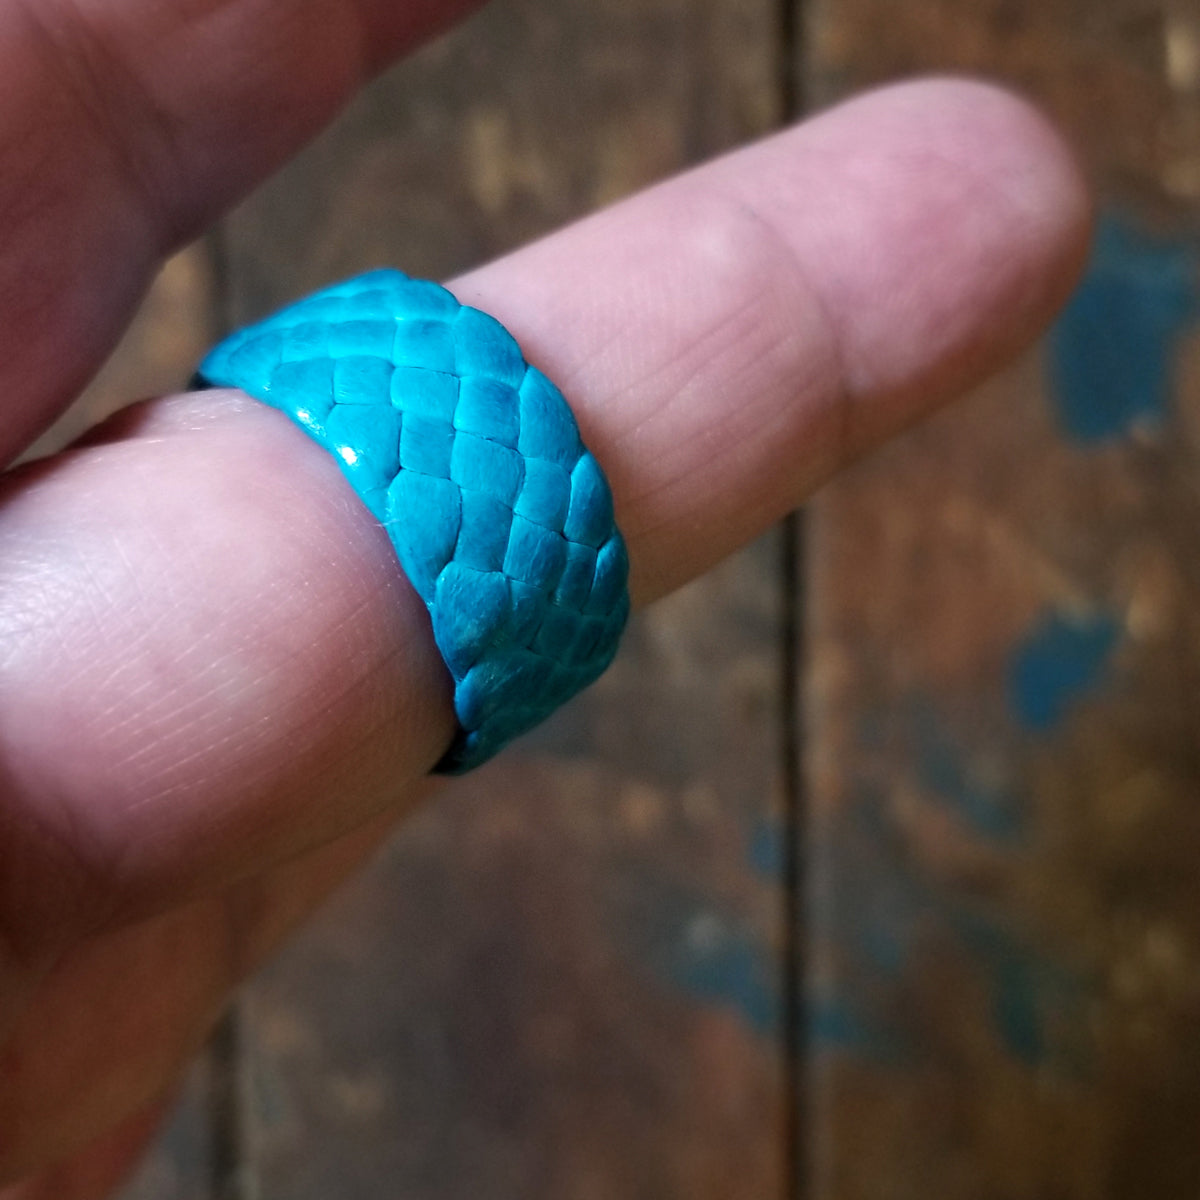 Men's Turquoise Kama Leather Ring | Men's Women's Braided Leather Rings | African Tribal Boho Gypsy Hippie, Woven Bridal Engagement Anniversary Wedding Band